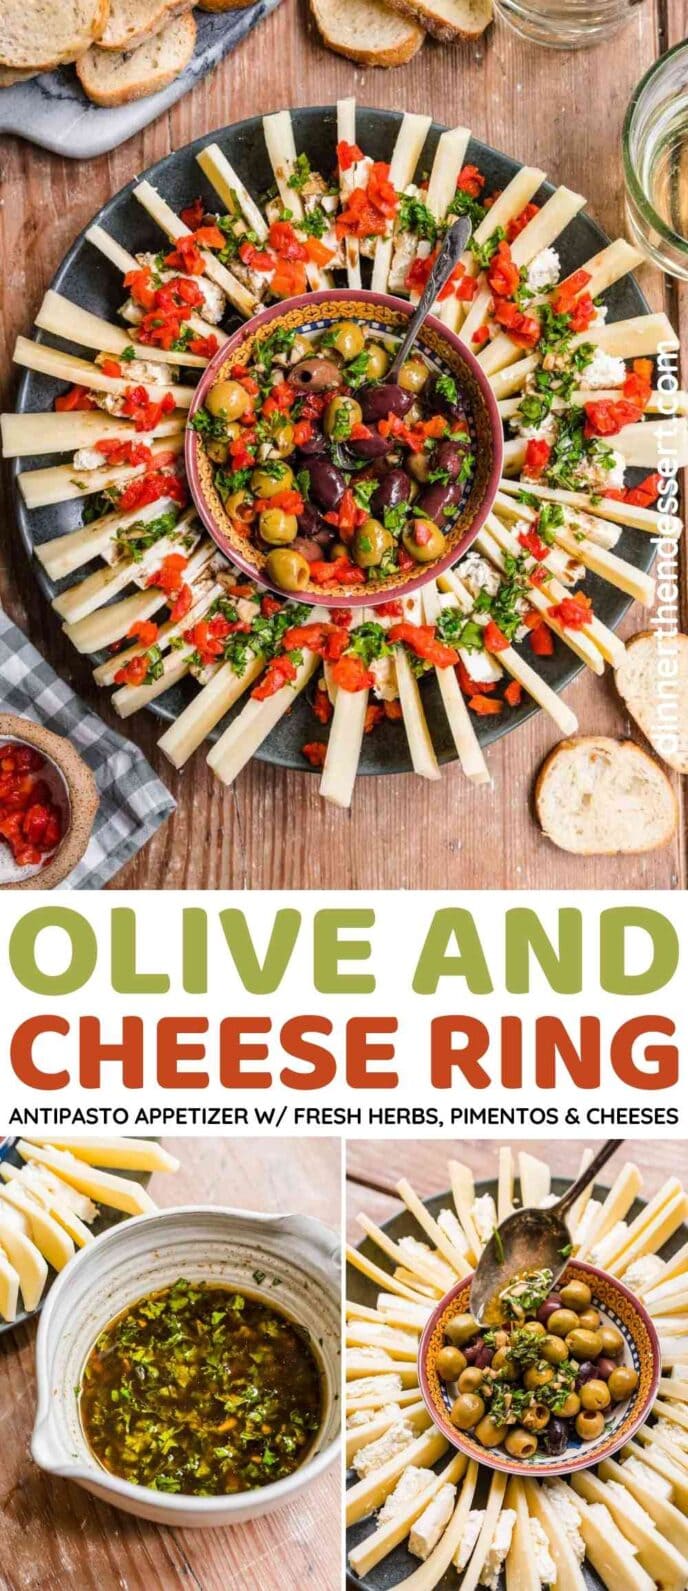 Olive and Cheese Ring Collage